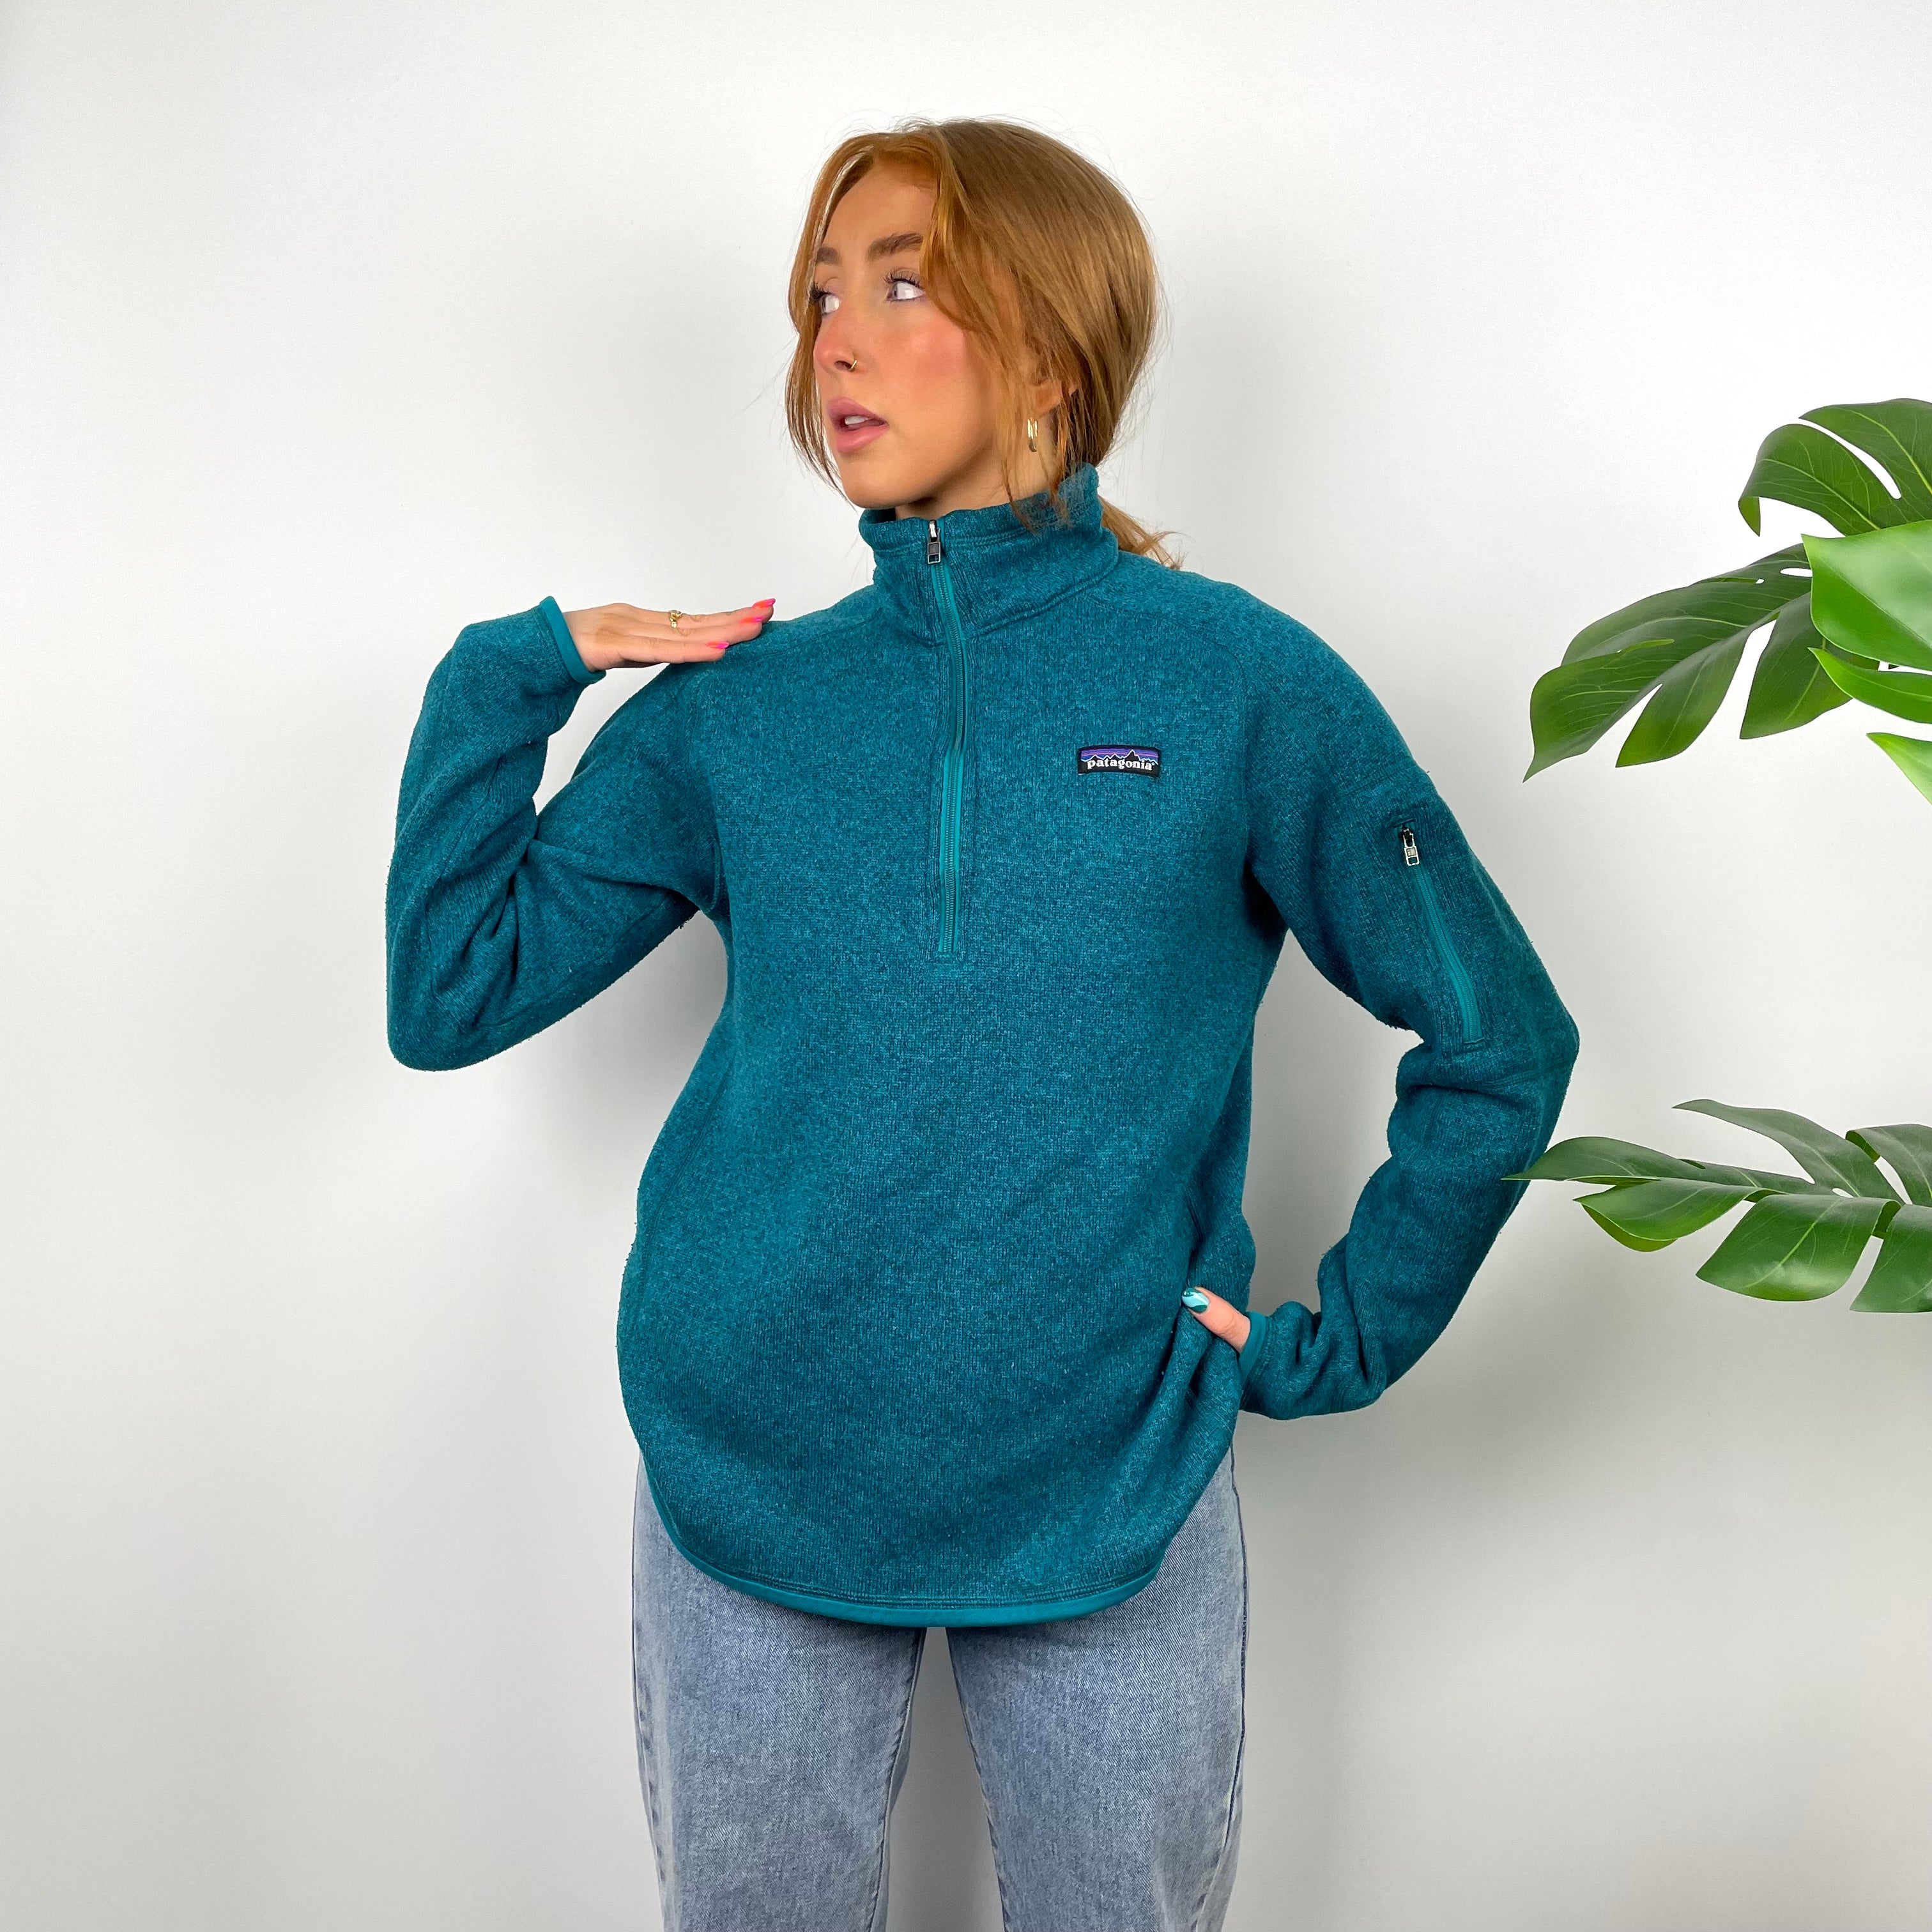 Patagonia RARE Turquoise Green Embroidered Spell Out Quarter Zip Sweatshirt (M)